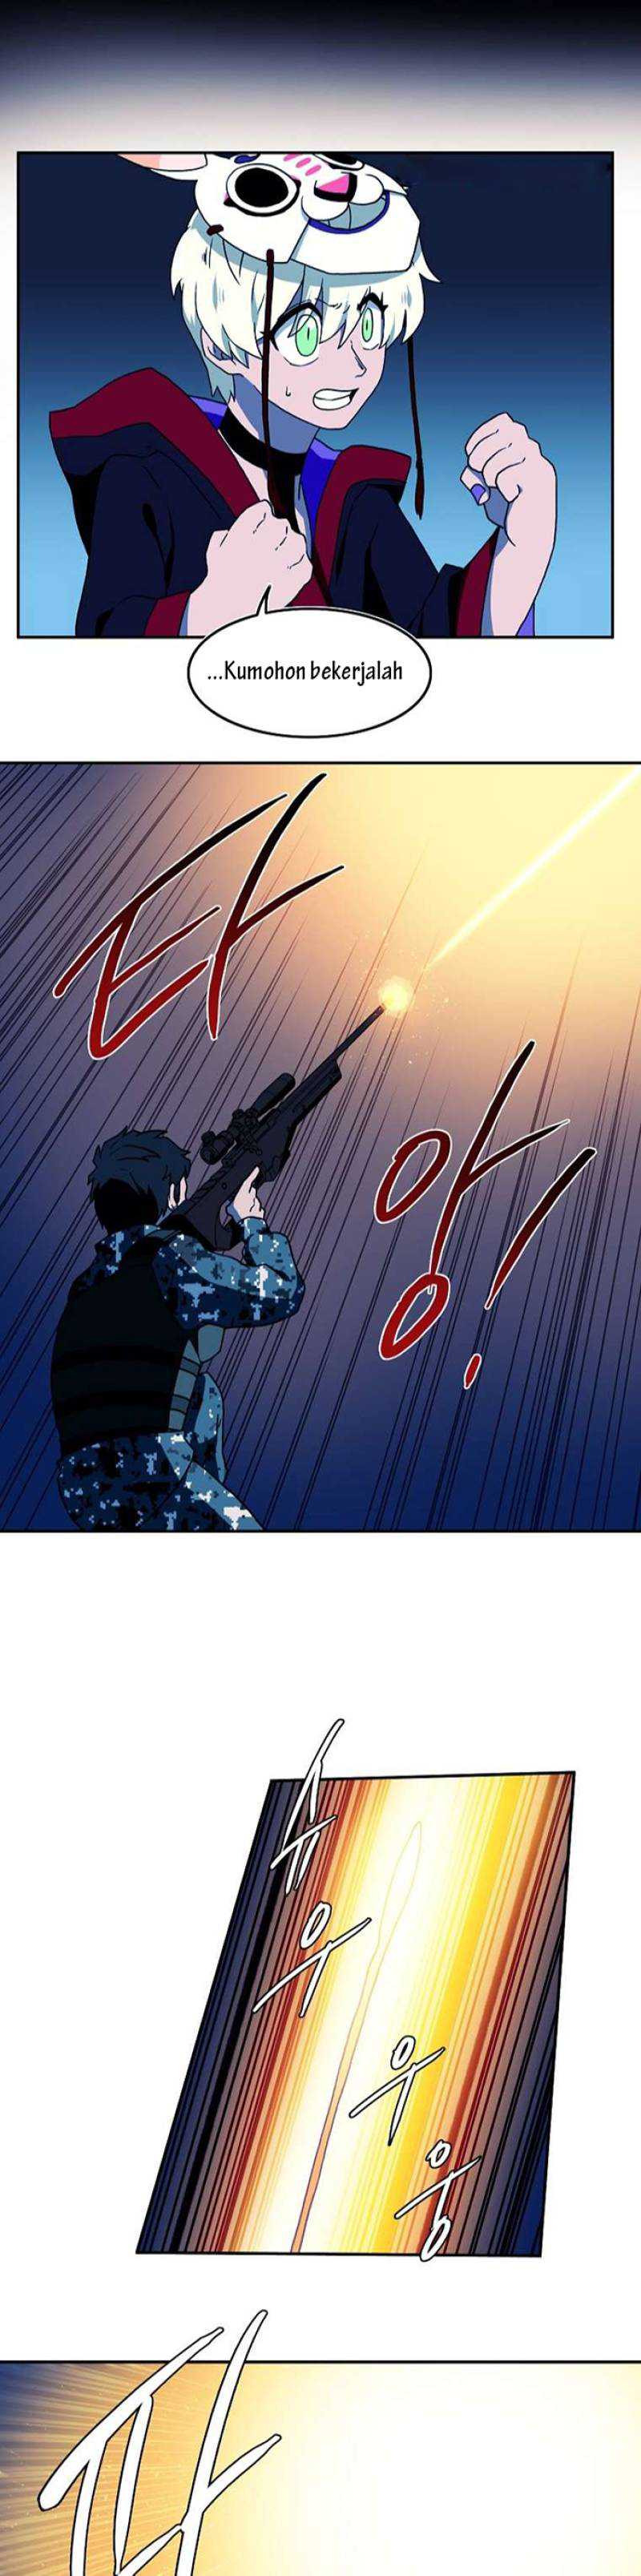 Magical Shooting Sniper Of Steel Chapter 23